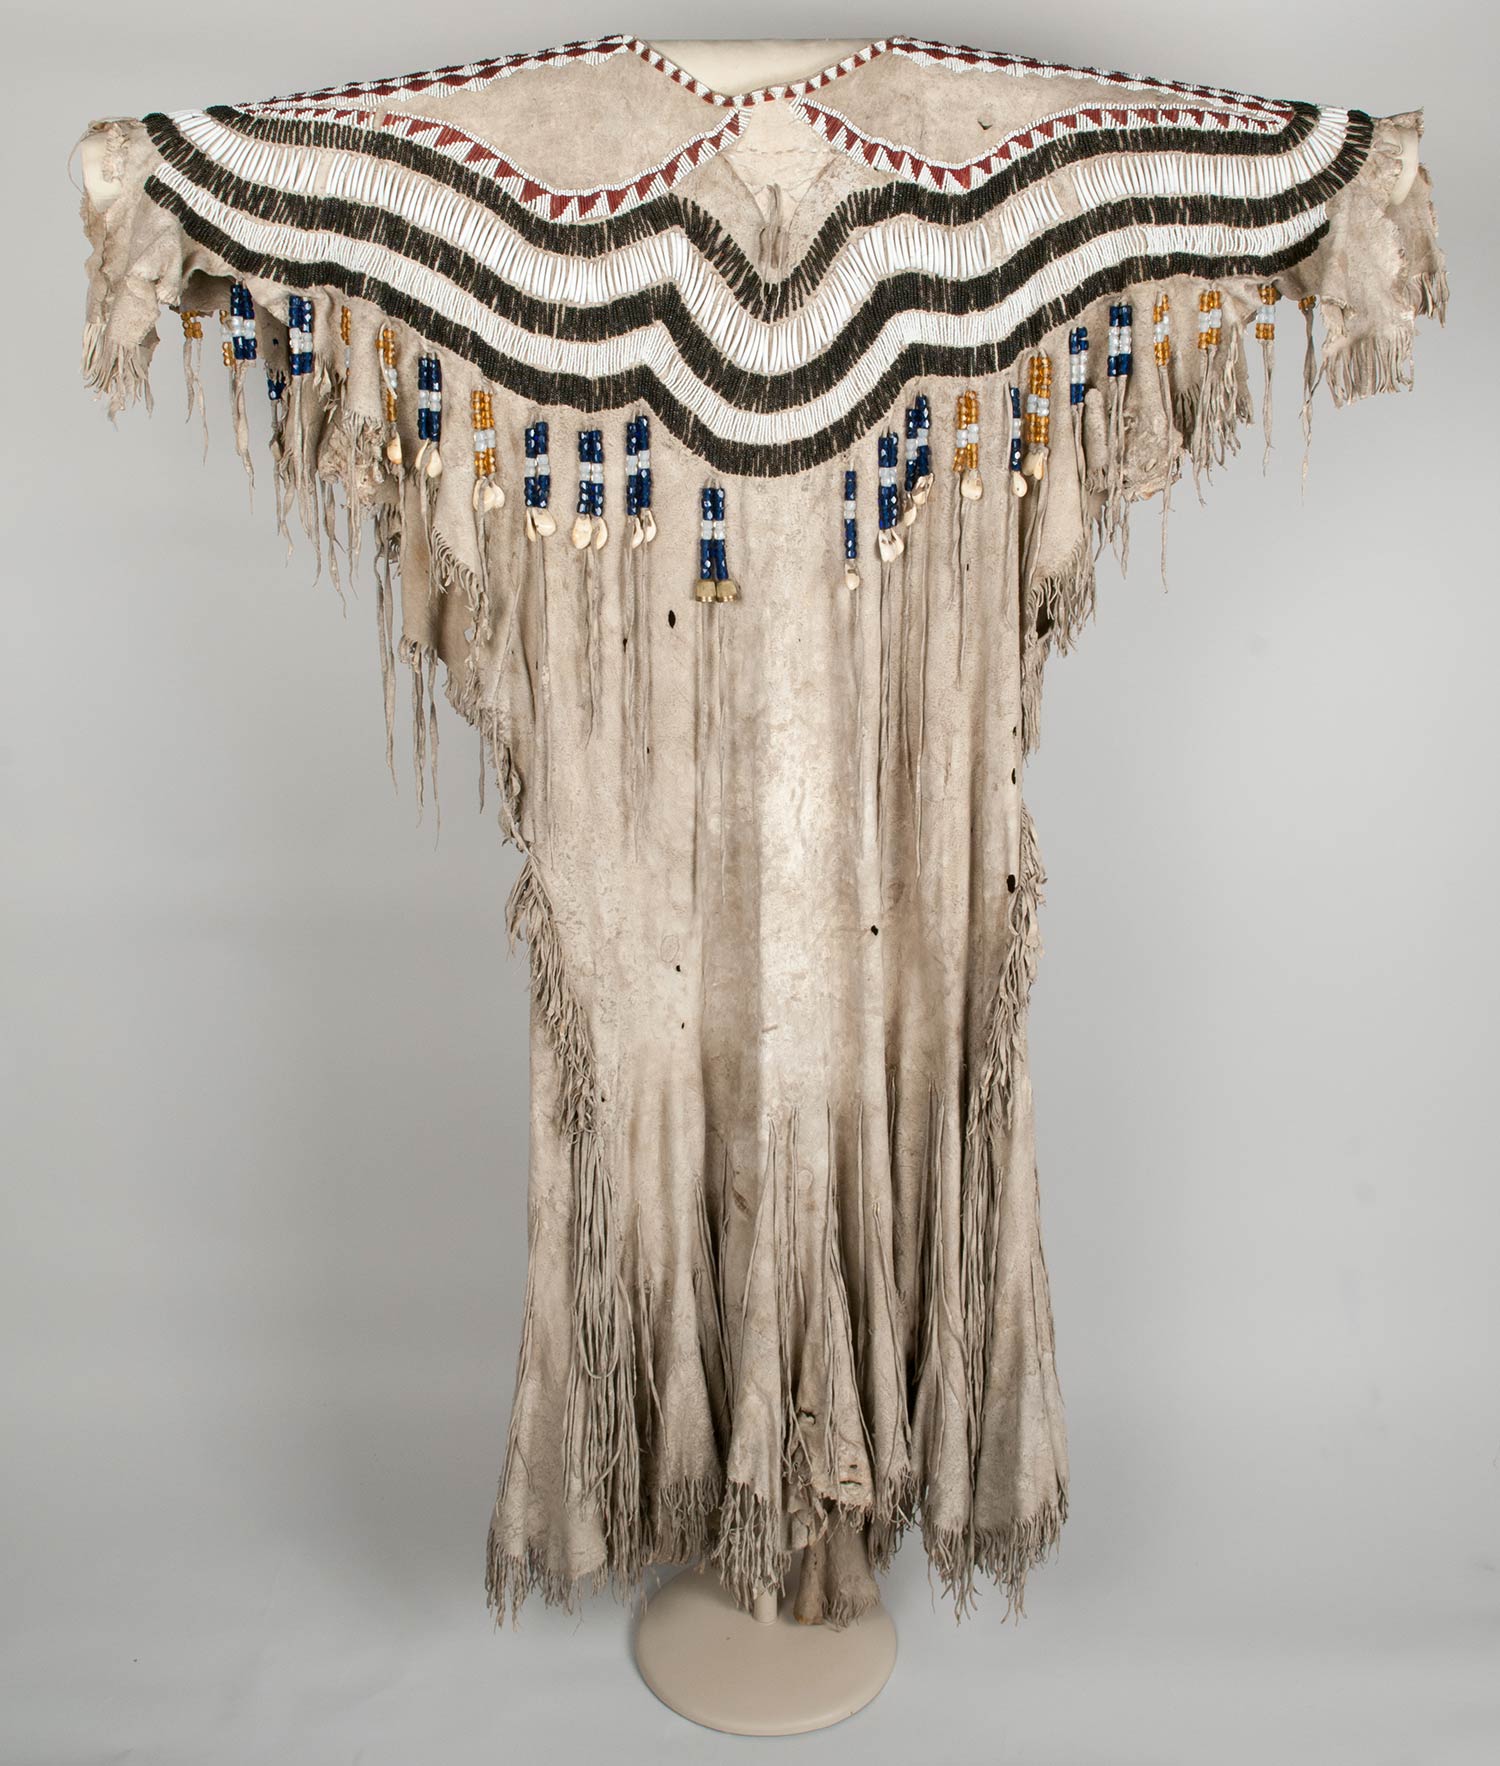 Woman's dress made of two deer skins and decorated with glass beads, dentalium, thimbles, elk teeth, and fringe.